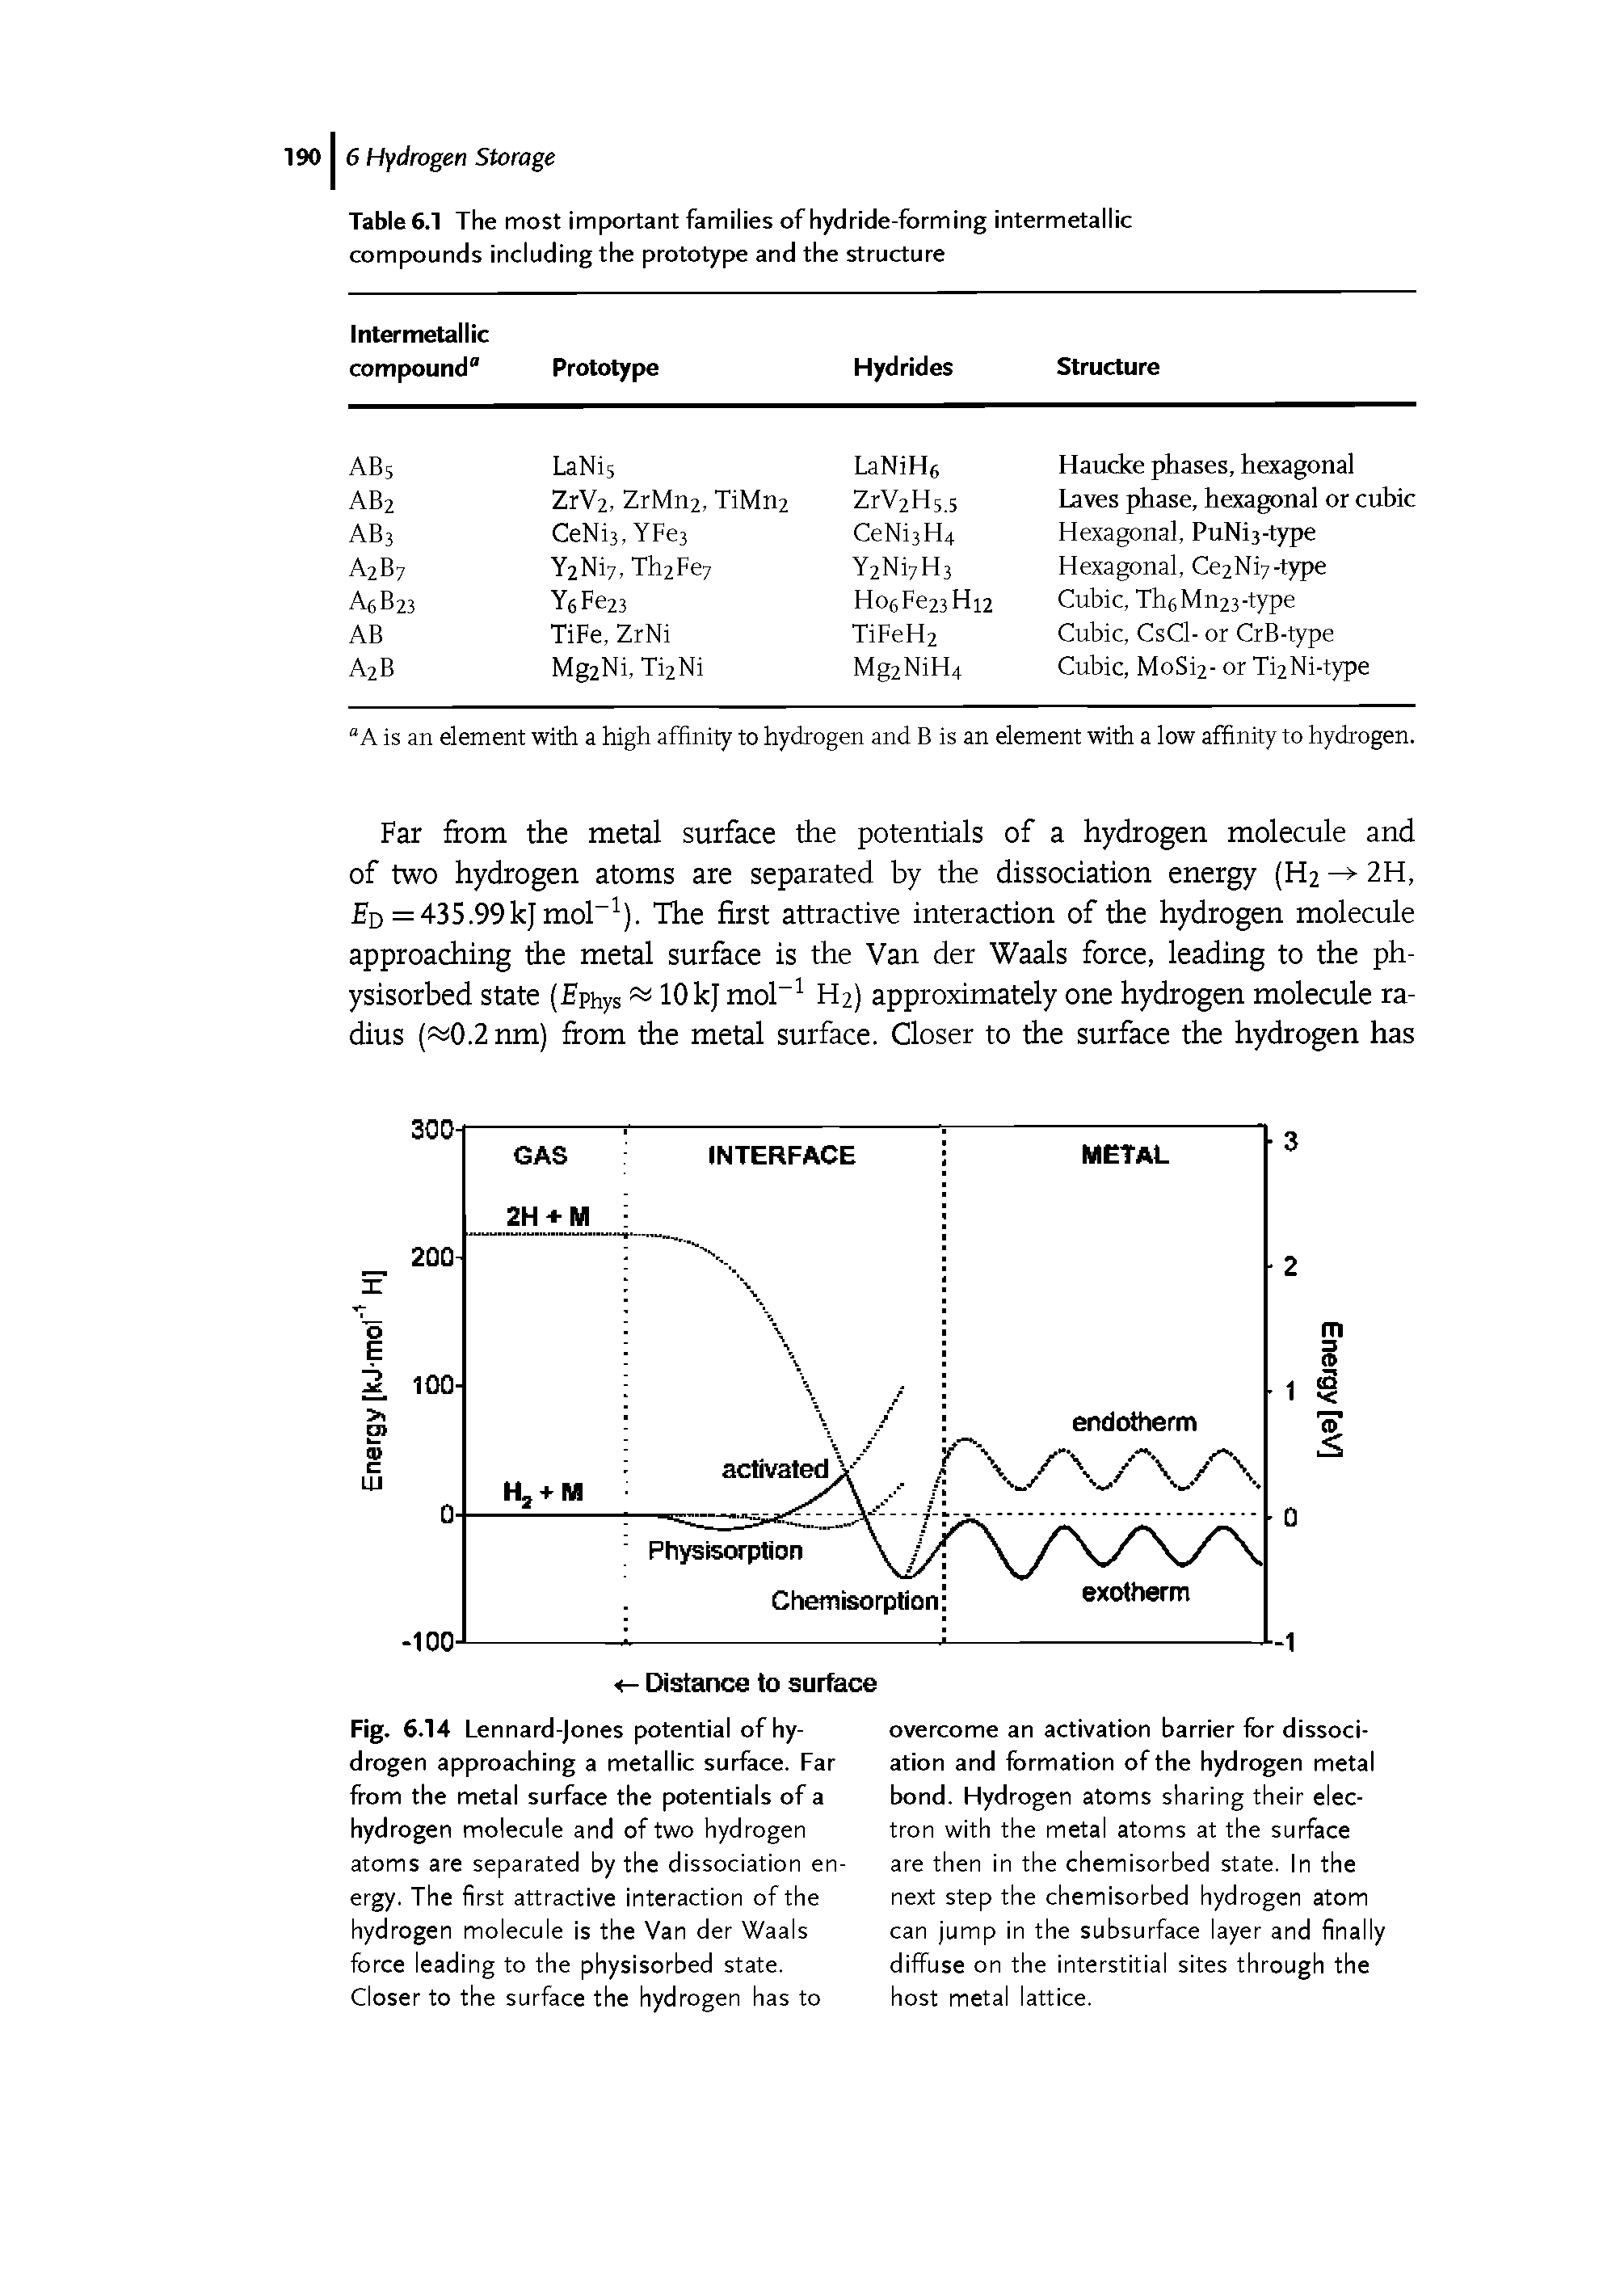 Fig. 6.14 Lennard-Jones potential of hydrogen approaching a metallic surface. Far from the metal surface the potentials of a hydrogen molecule and of two hydrogen atoms are separated by the dissociation energy. The first attractive interaction of the hydrogen molecule is the Van der Waals force leading to the physisorbed state. Closer to the surface the hydrogen has to...